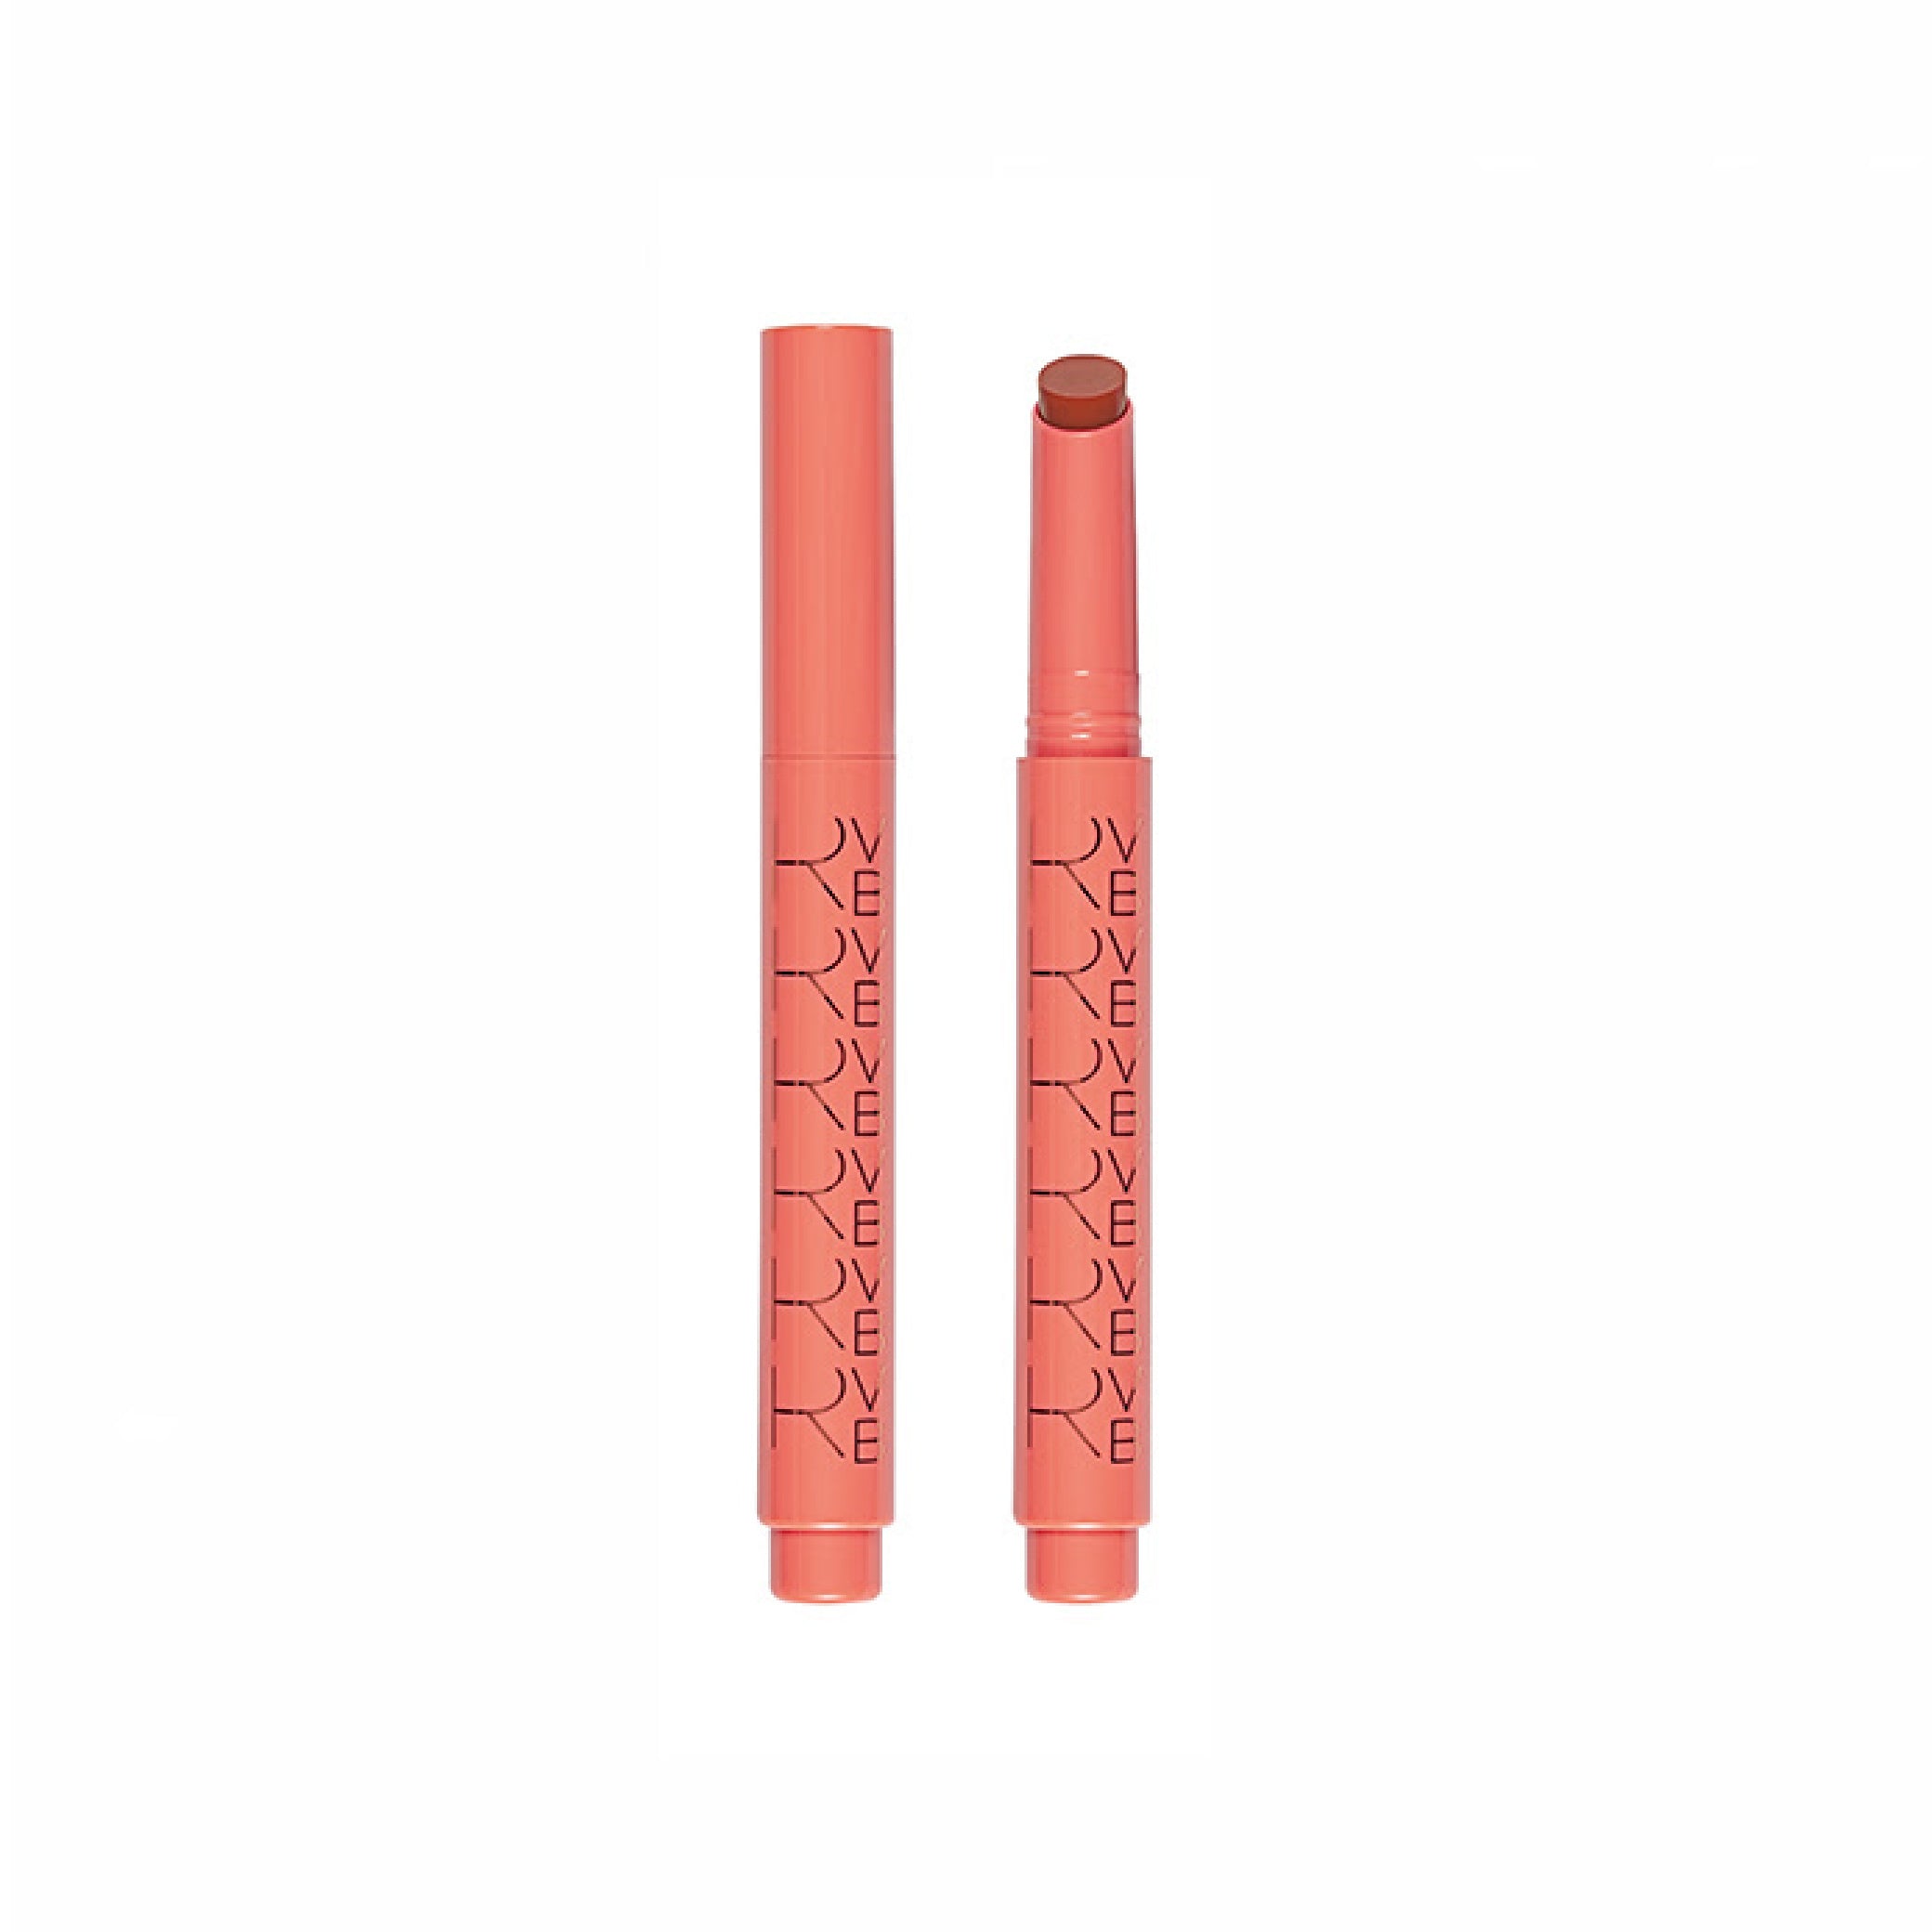 RVB Lab le maquillage Gloss Nude 20, Pink Avenue Skin Care, Toronto Canada